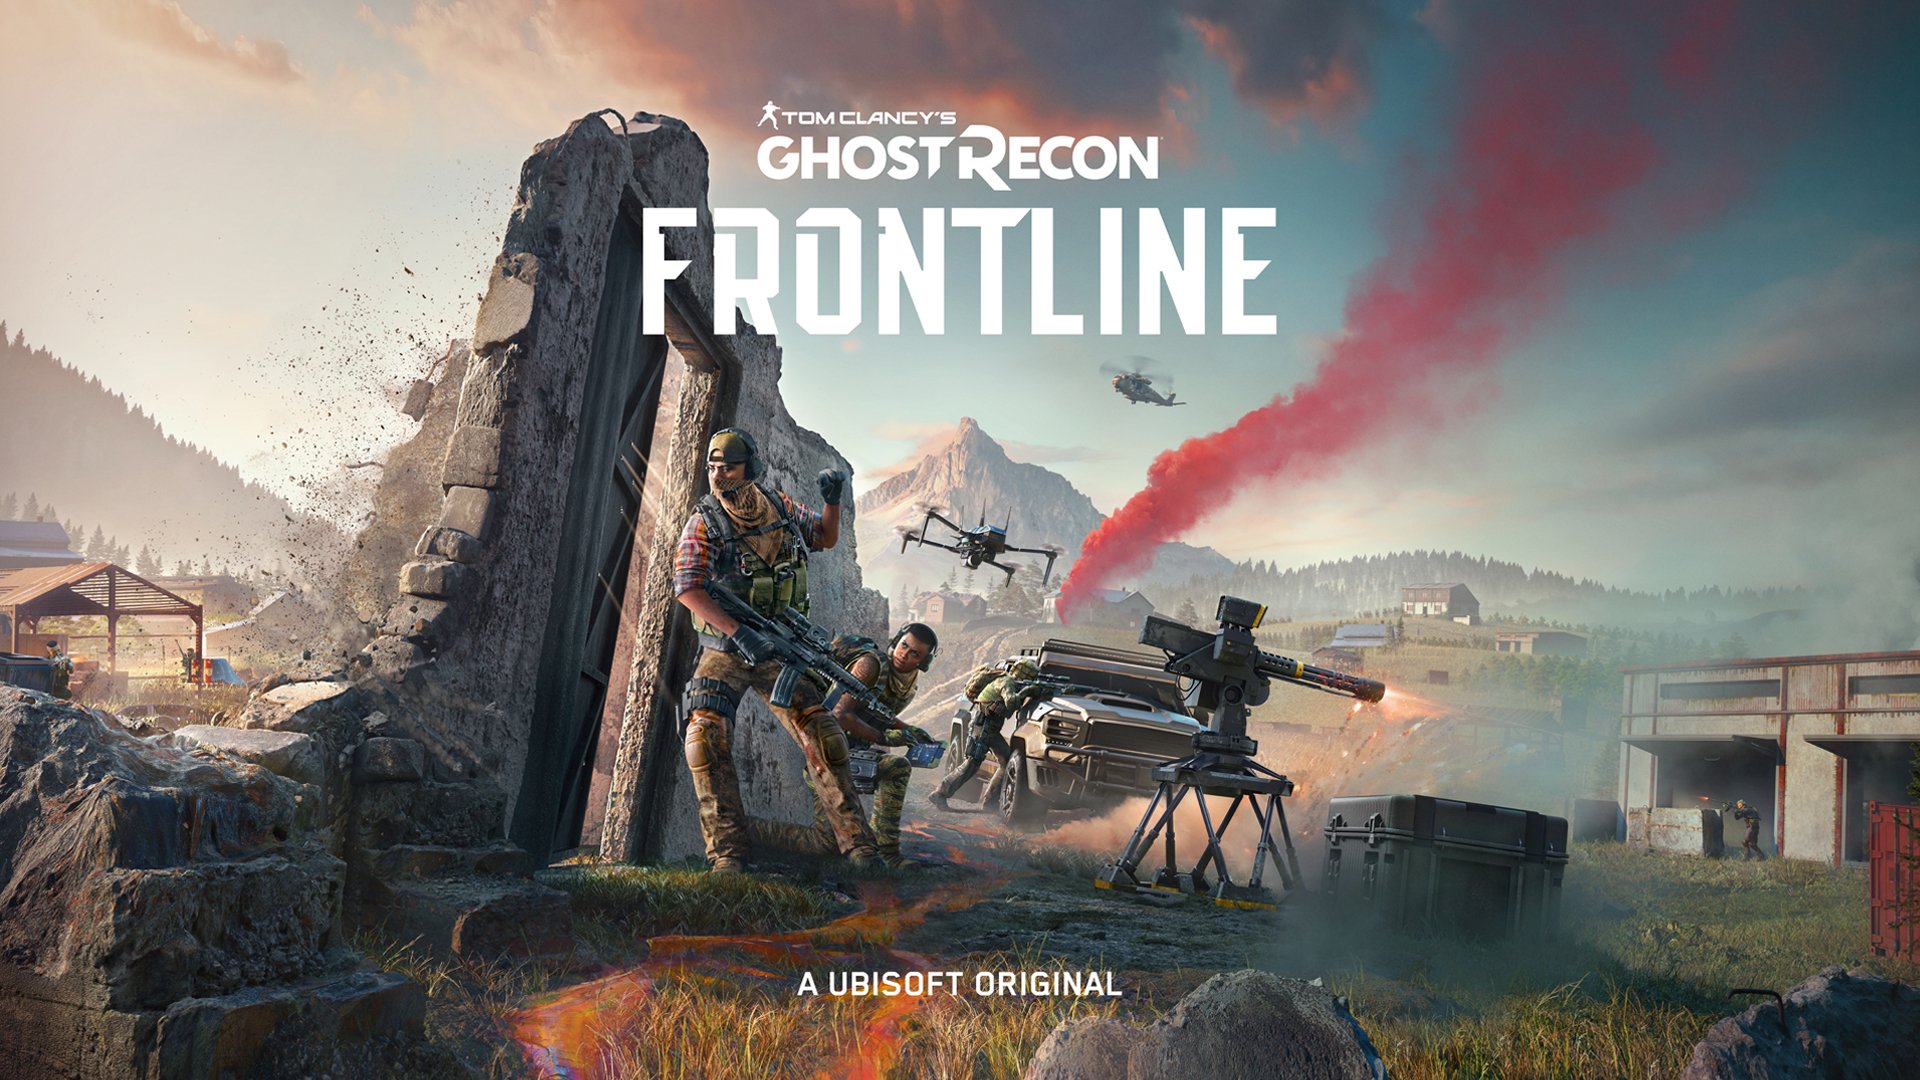 Free-to-play battle royale Tom Clancy’s Ghost Recon Frontline announced for PS5, Xbox Series, PS4, Xbox One, PC, and Stadia – Gematsu